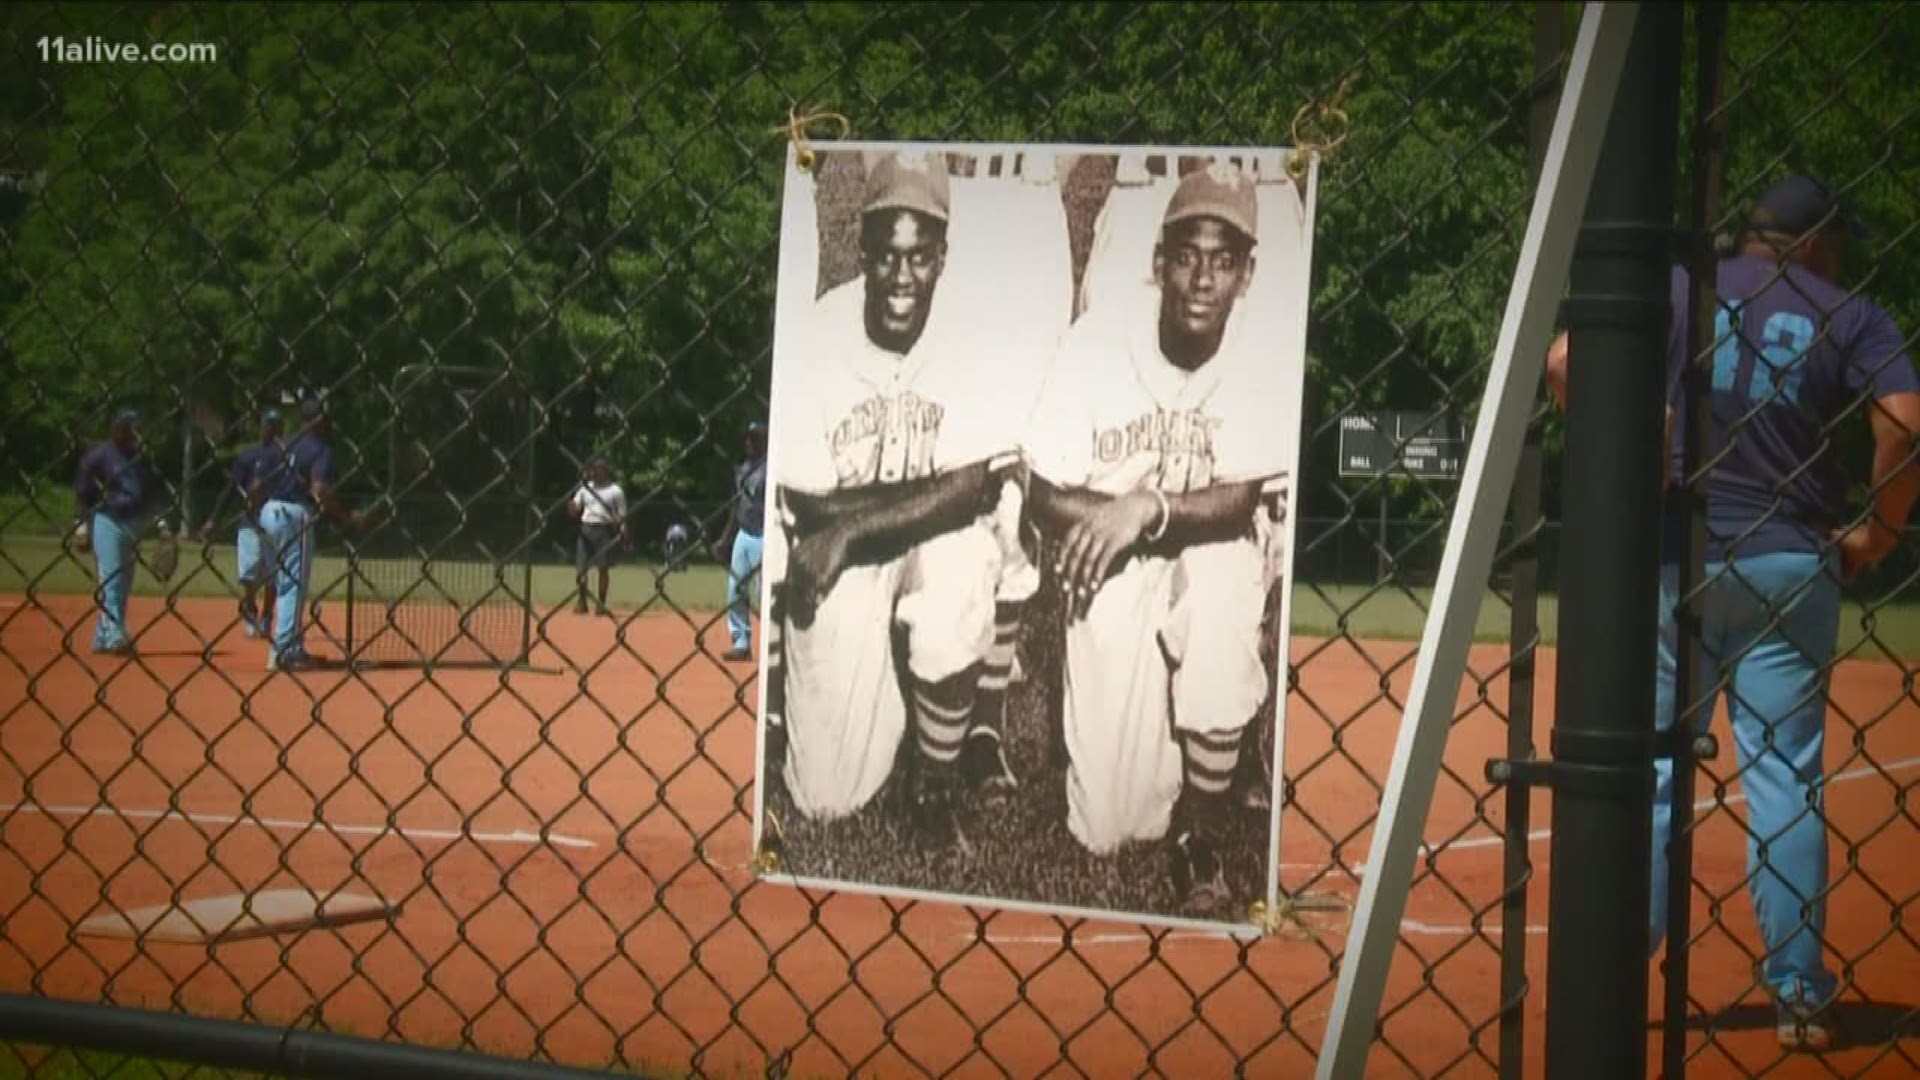 This Atlanta baseball legend went on to play with Jackie Robinson and even took over his base when he left.